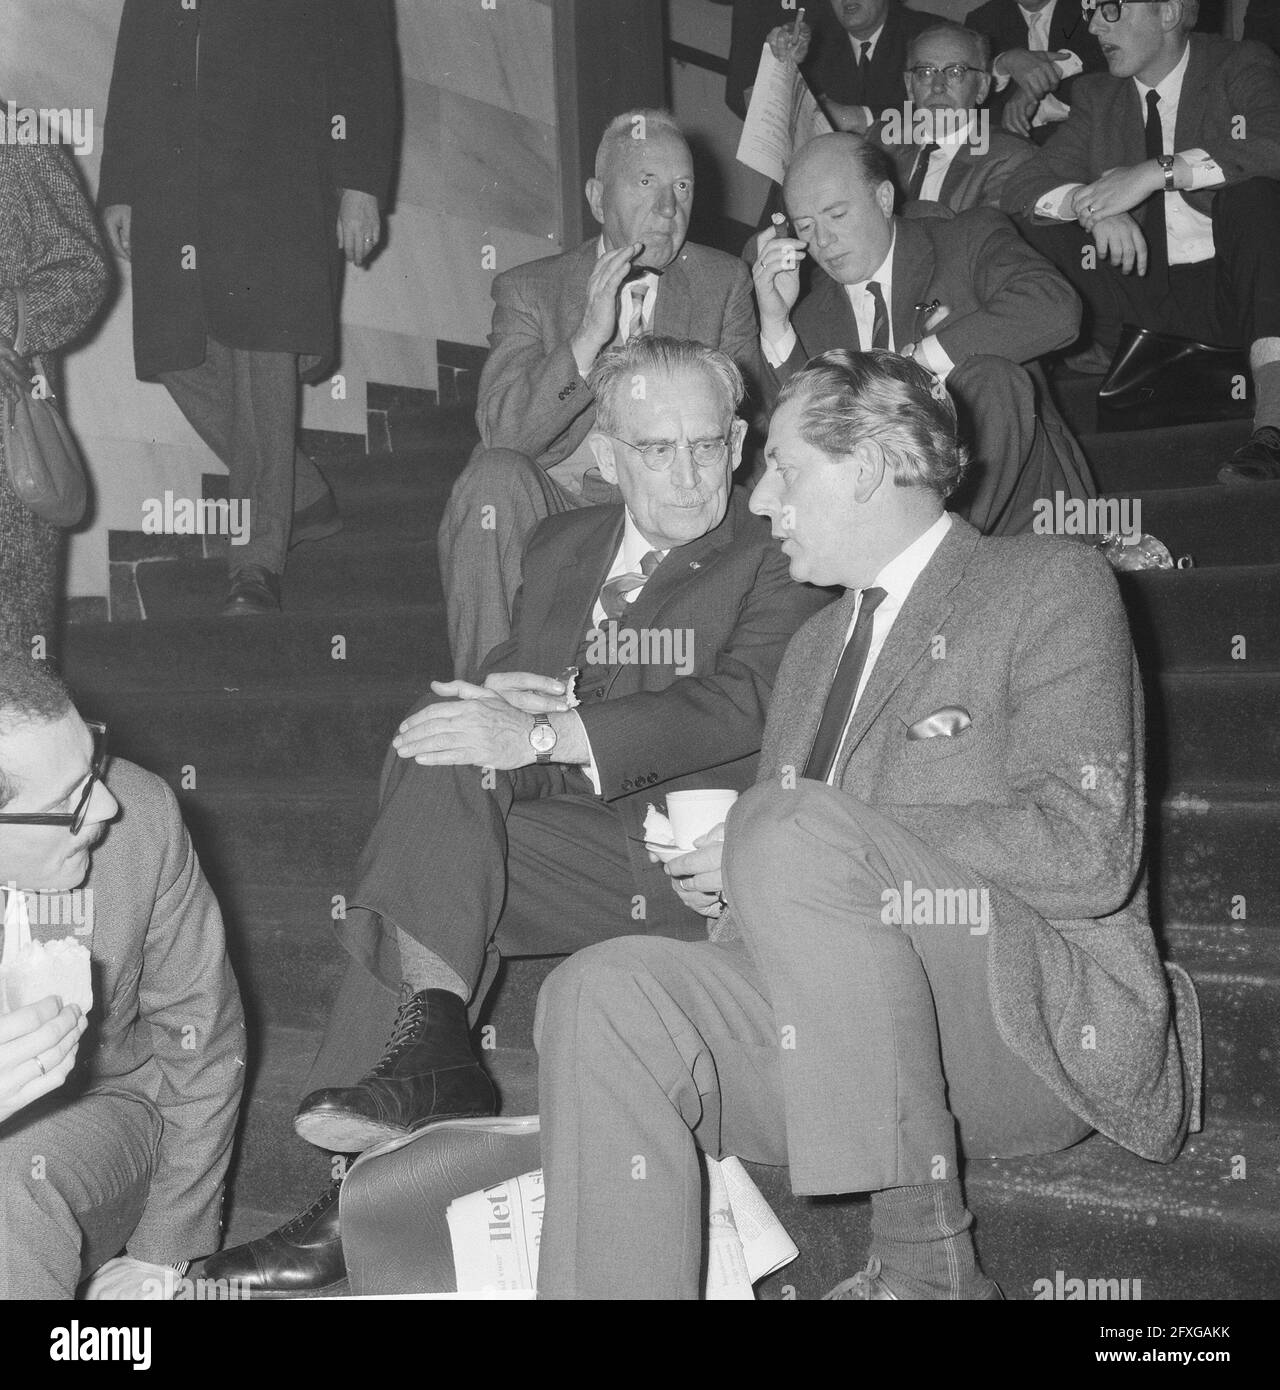 Electoral congress of the PvdA at Nijmegen; Willem Drees (l) in conversation, November 27, 1965, conferences, talks, politicians, political parties, The Netherlands, 20th century press agency photo, news to remember, documentary, historic photography 1945-1990, visual stories, human history of the Twentieth Century, capturing moments in time Stock Photo